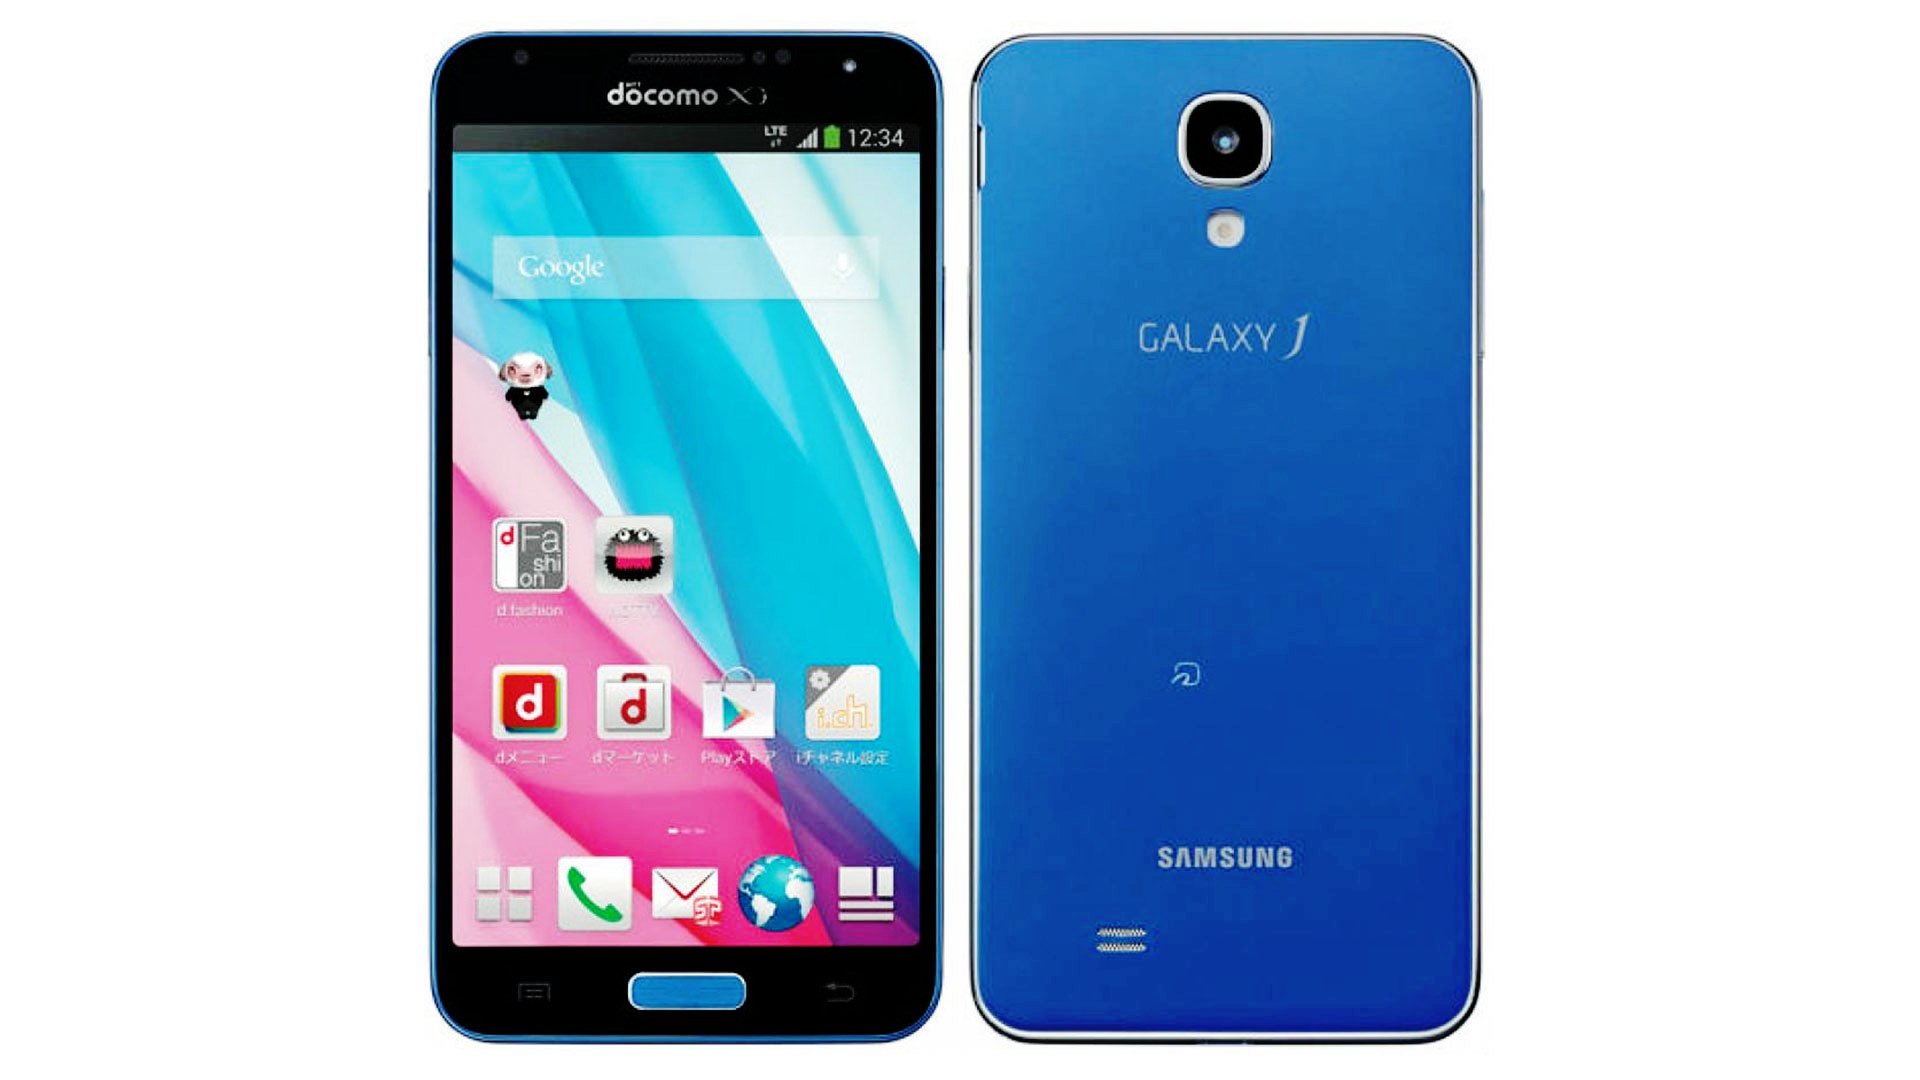 Samsung Galaxy J Launched Officially In Taiwan For 740 Times News Uk